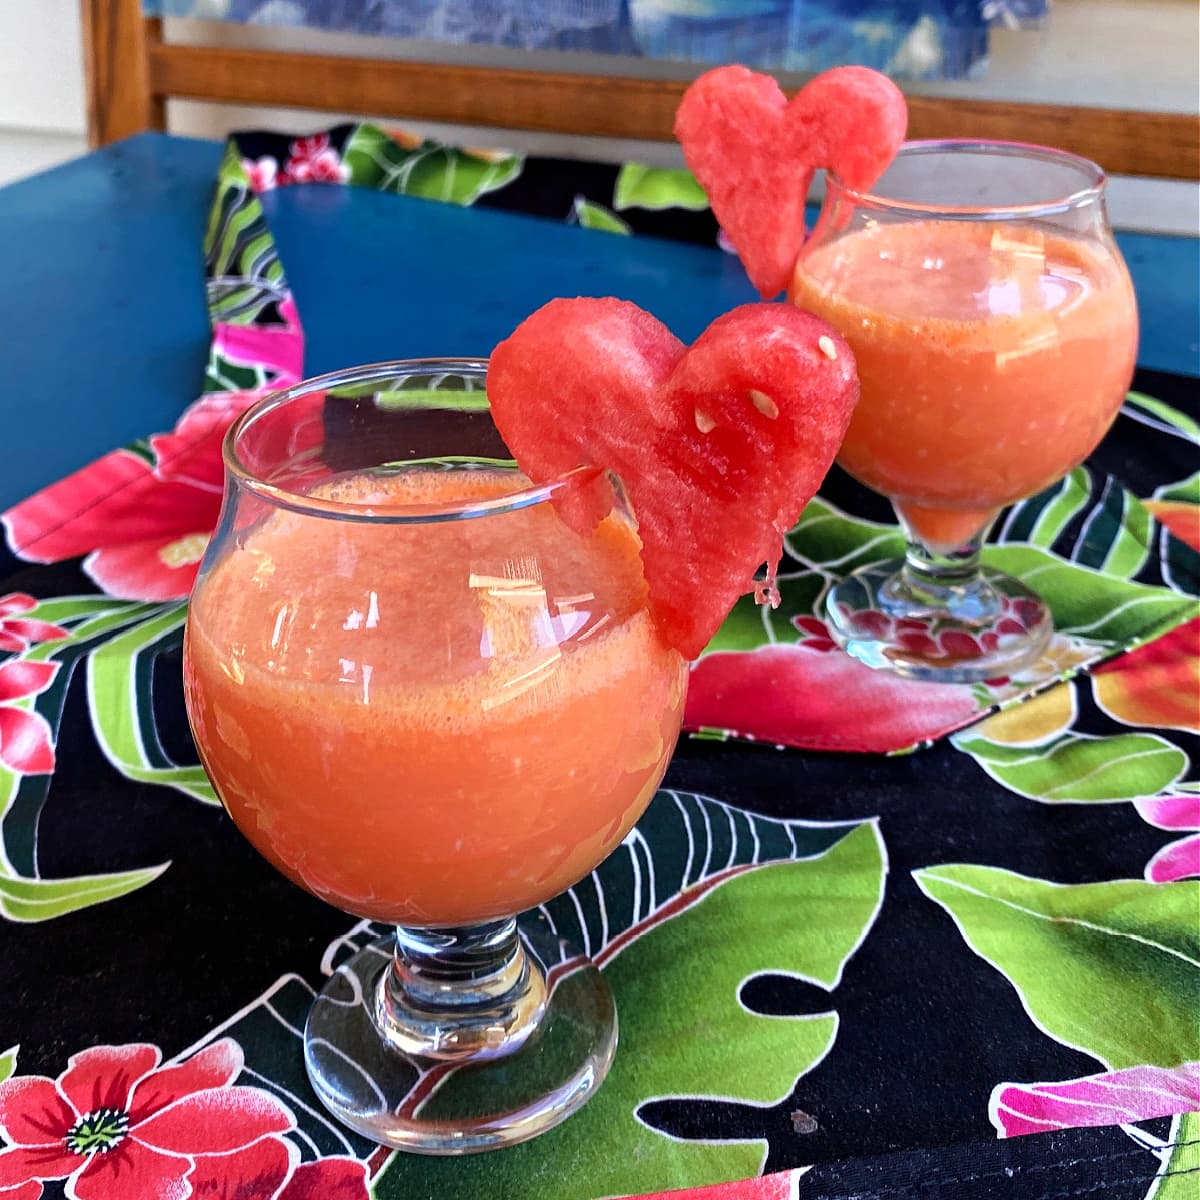 Otai in small snifter-style glasses, garnished with watermelon cut-outs.